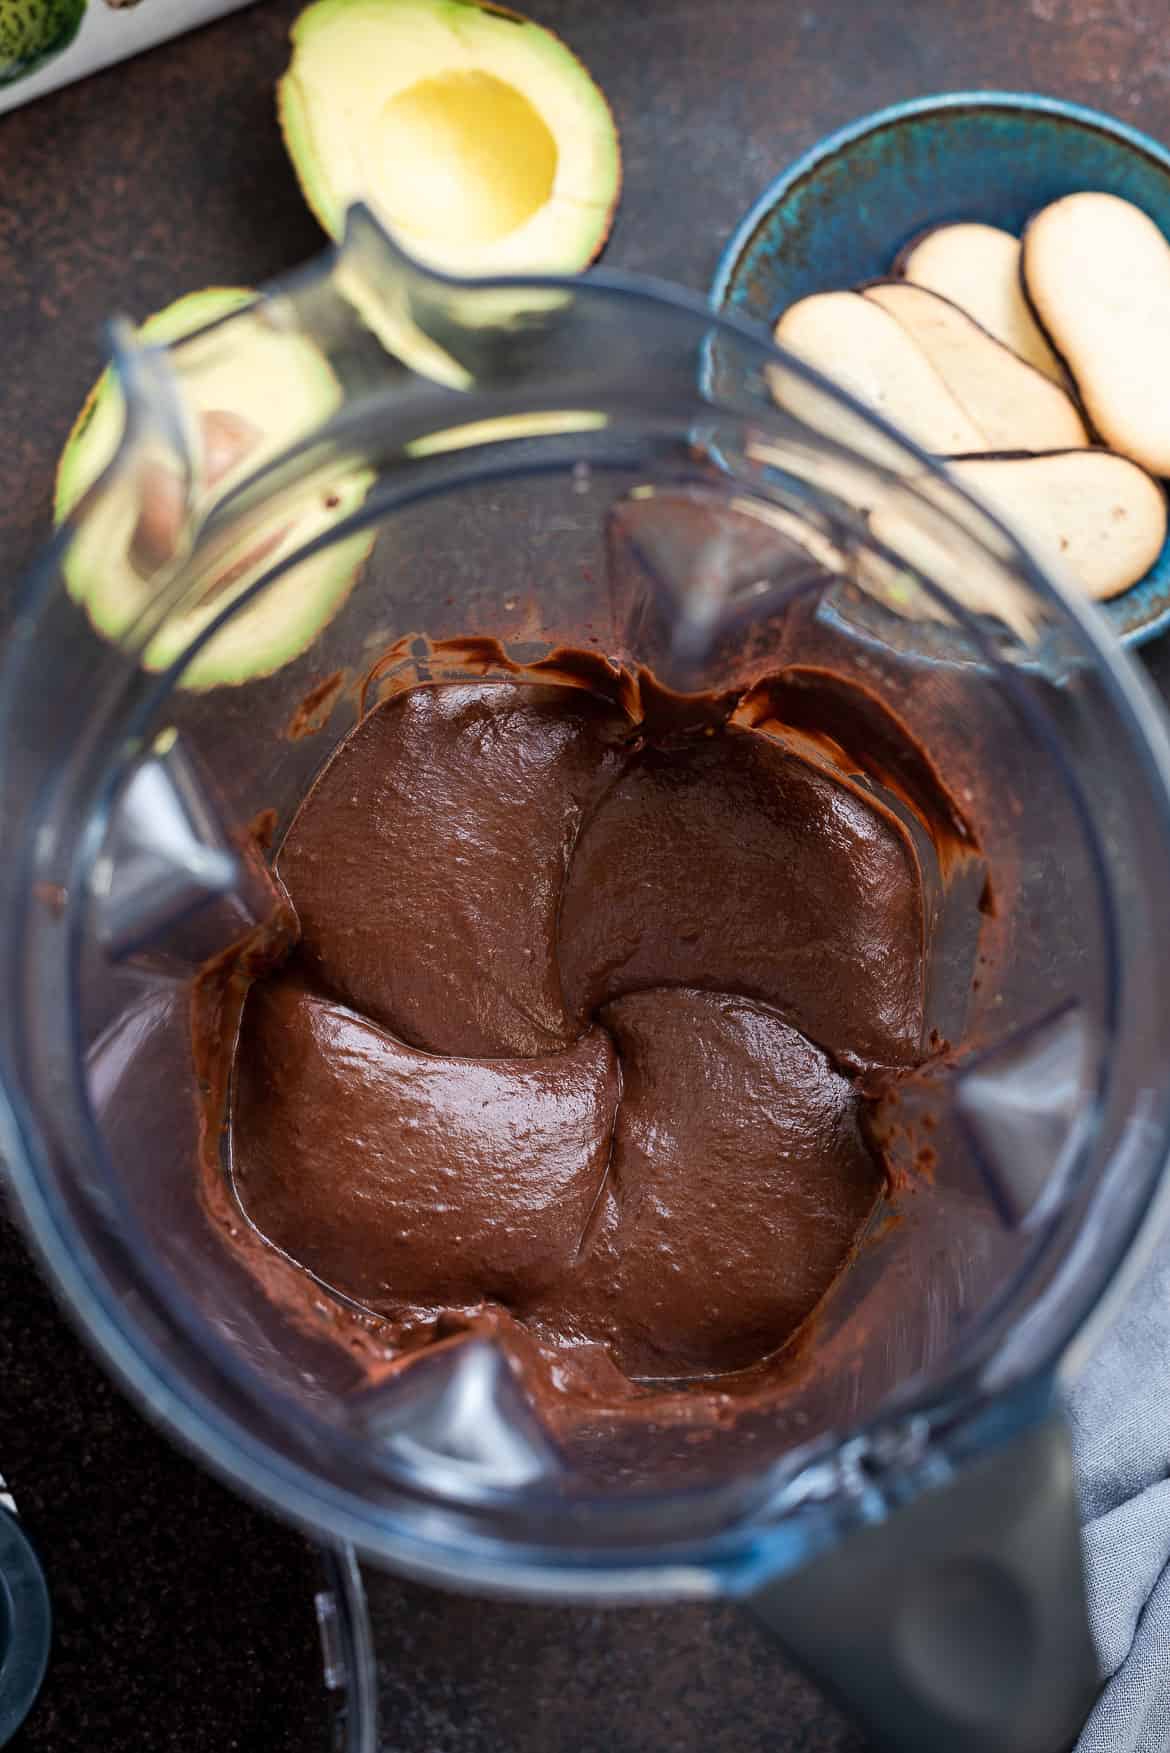 Avocado Chocolate Pudding in a blender.